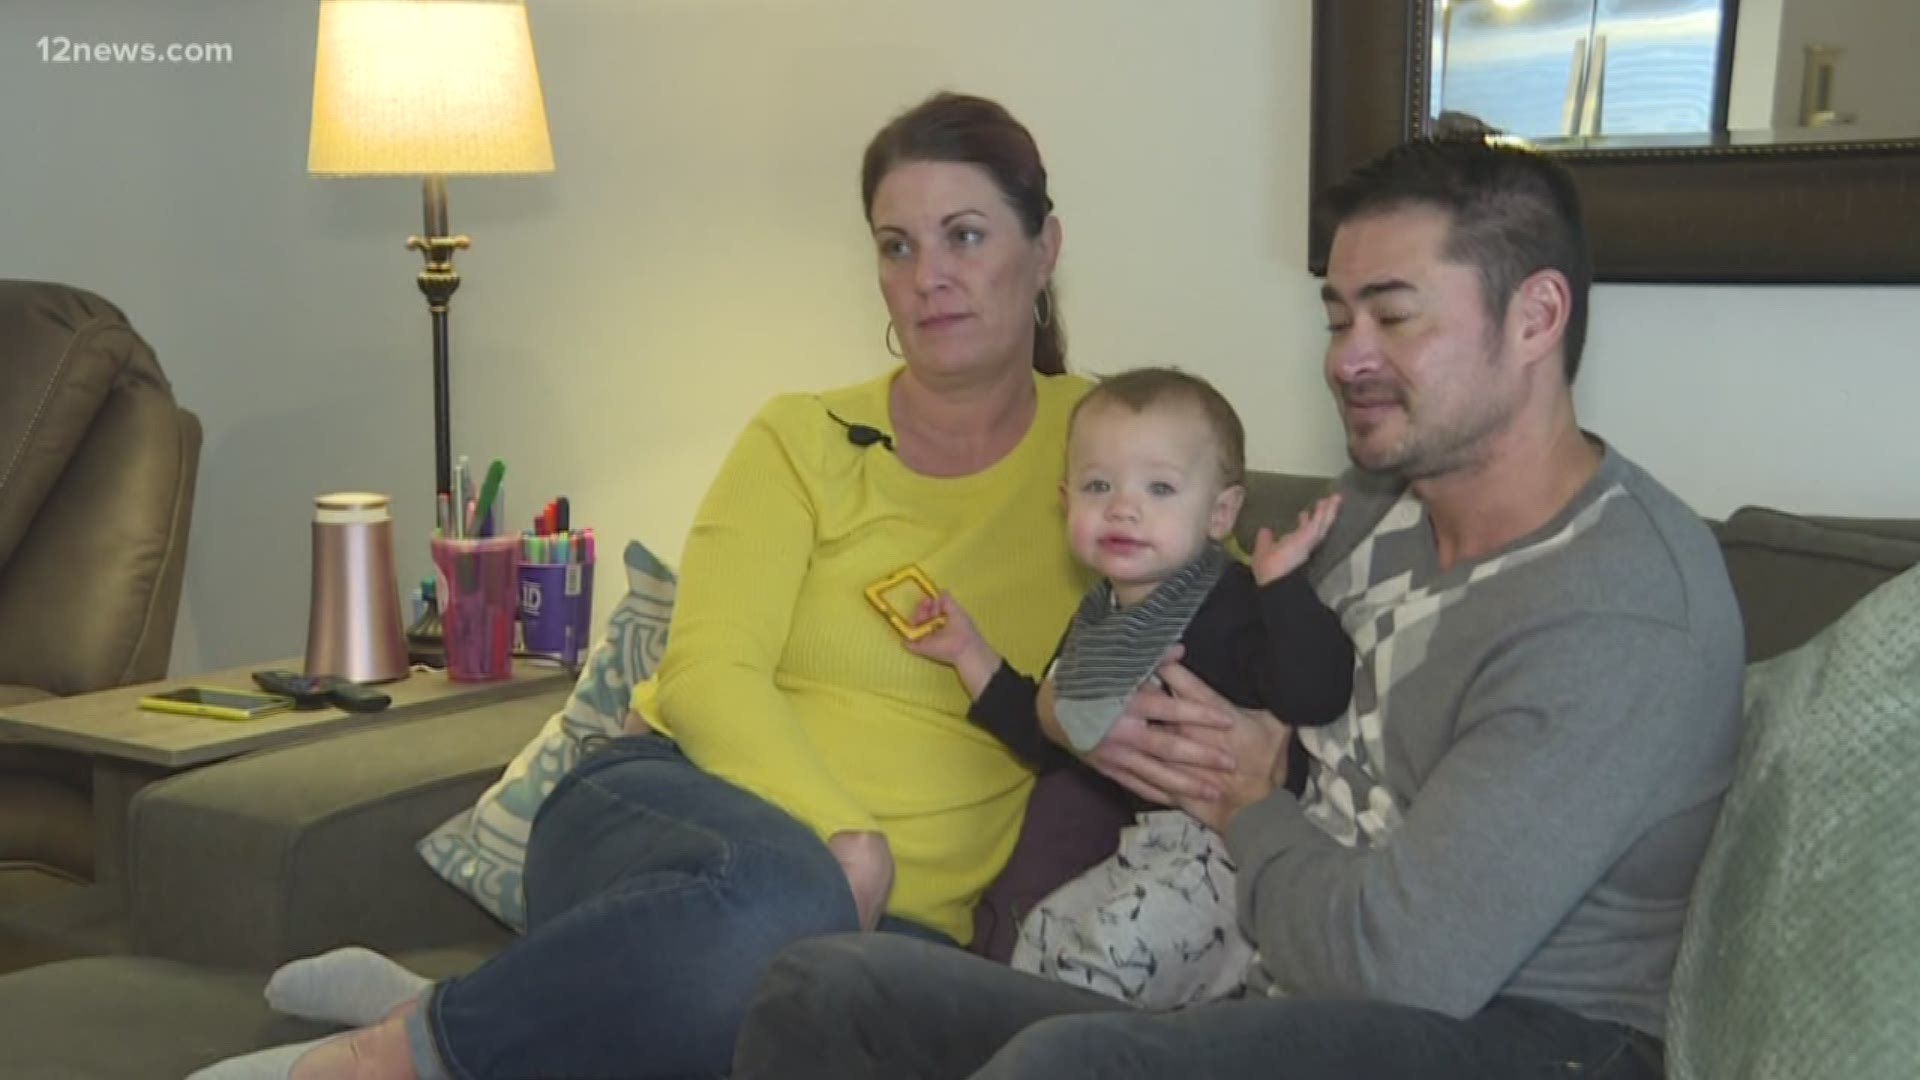 Thomas Beattie made headlines in 2008 as the first man to become pregnant. Beattie was born a woman and later transitioned. Now, he lives in Phoenix with his four children. We catch up with him to see how his life has changed in the past decade.